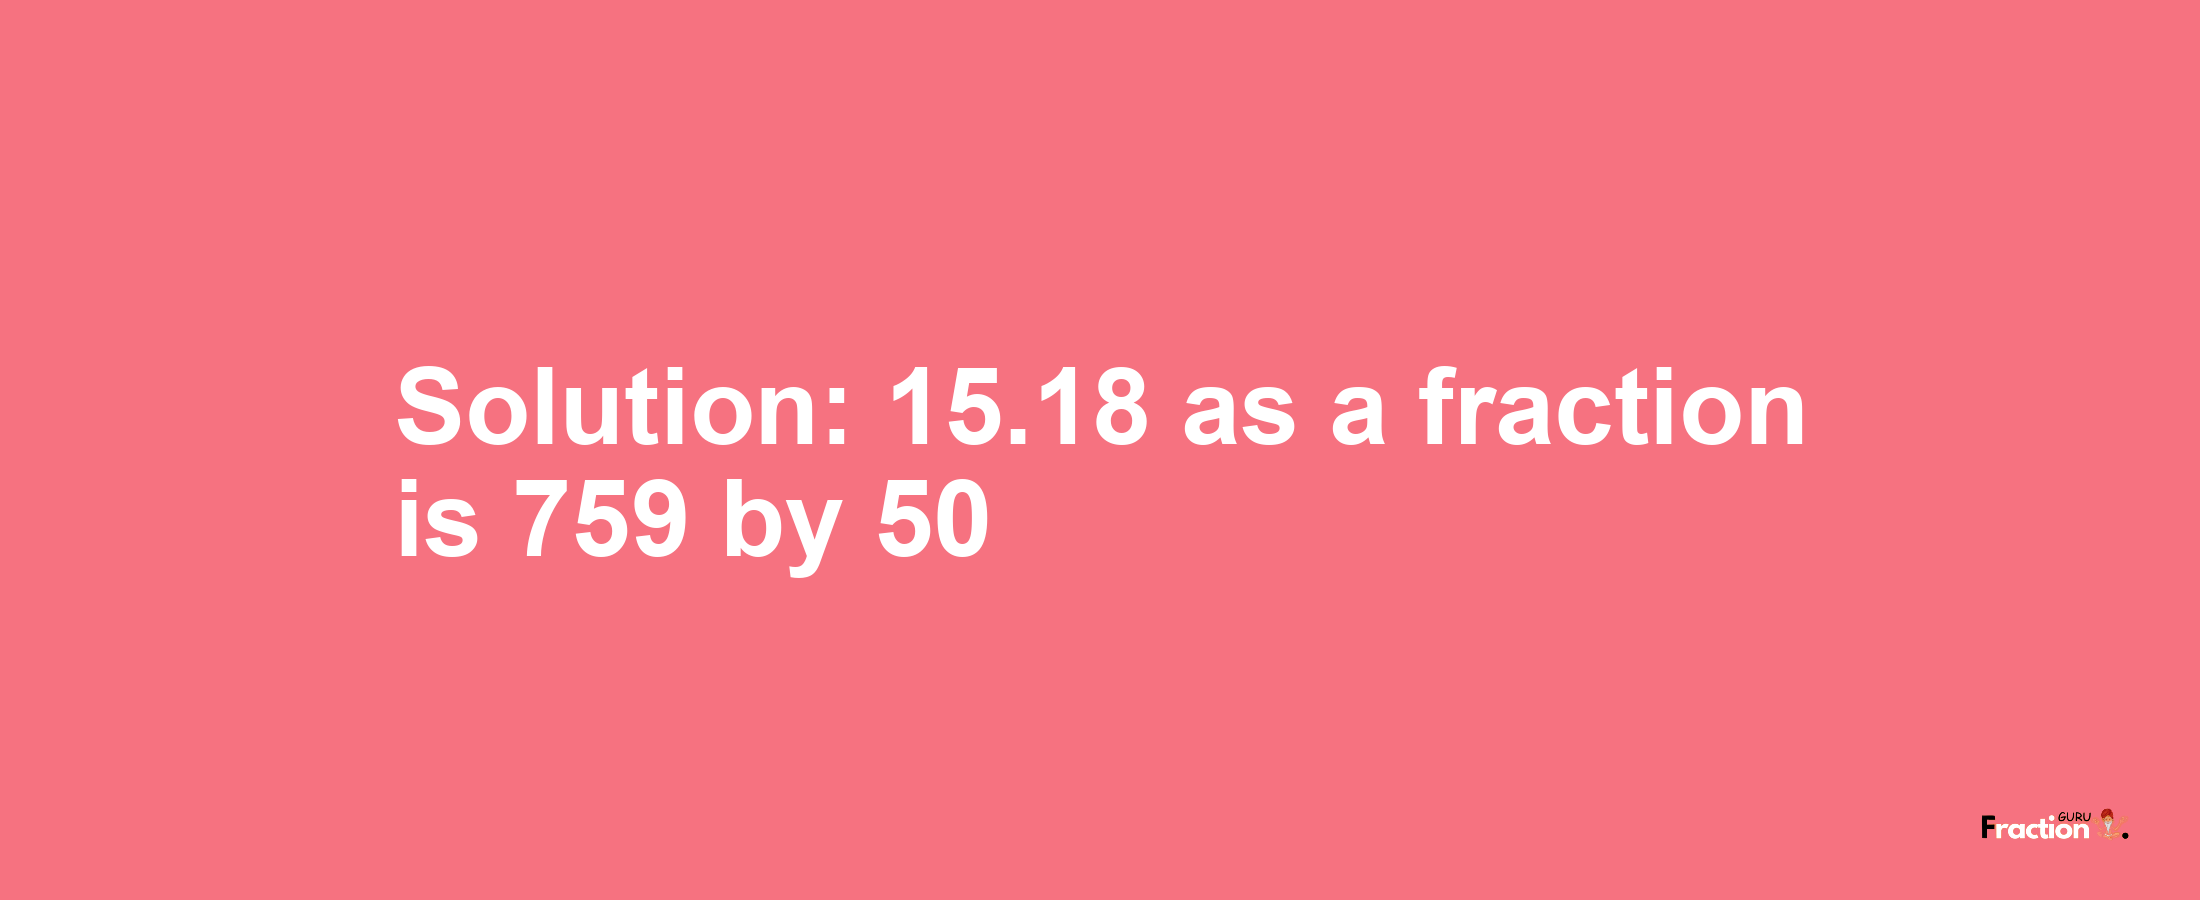 Solution:15.18 as a fraction is 759/50